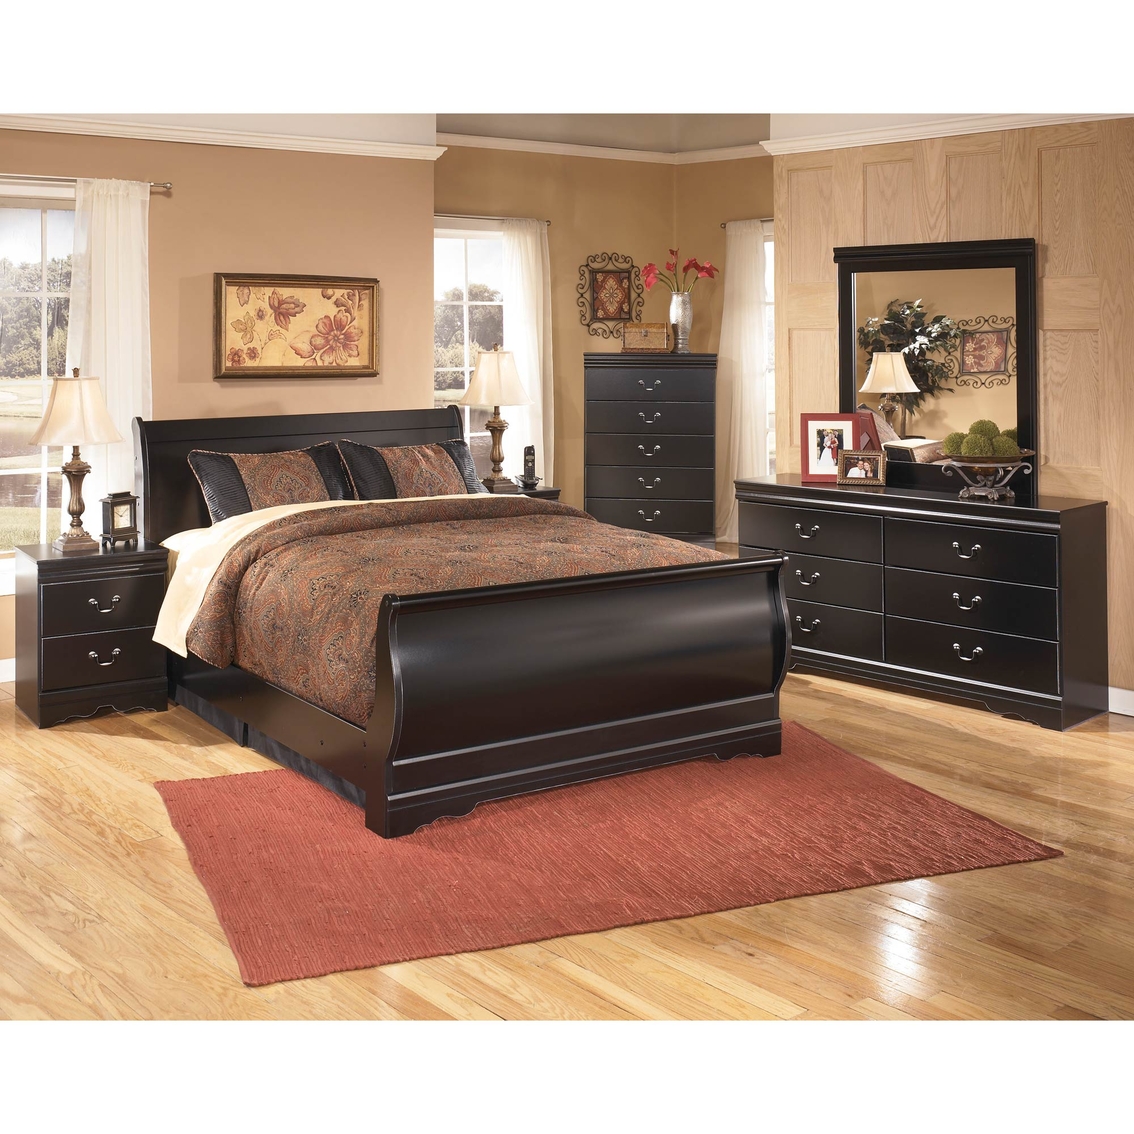 Signature Design by Ashley Huey Vineyard Sleigh Bed - Image 3 of 3